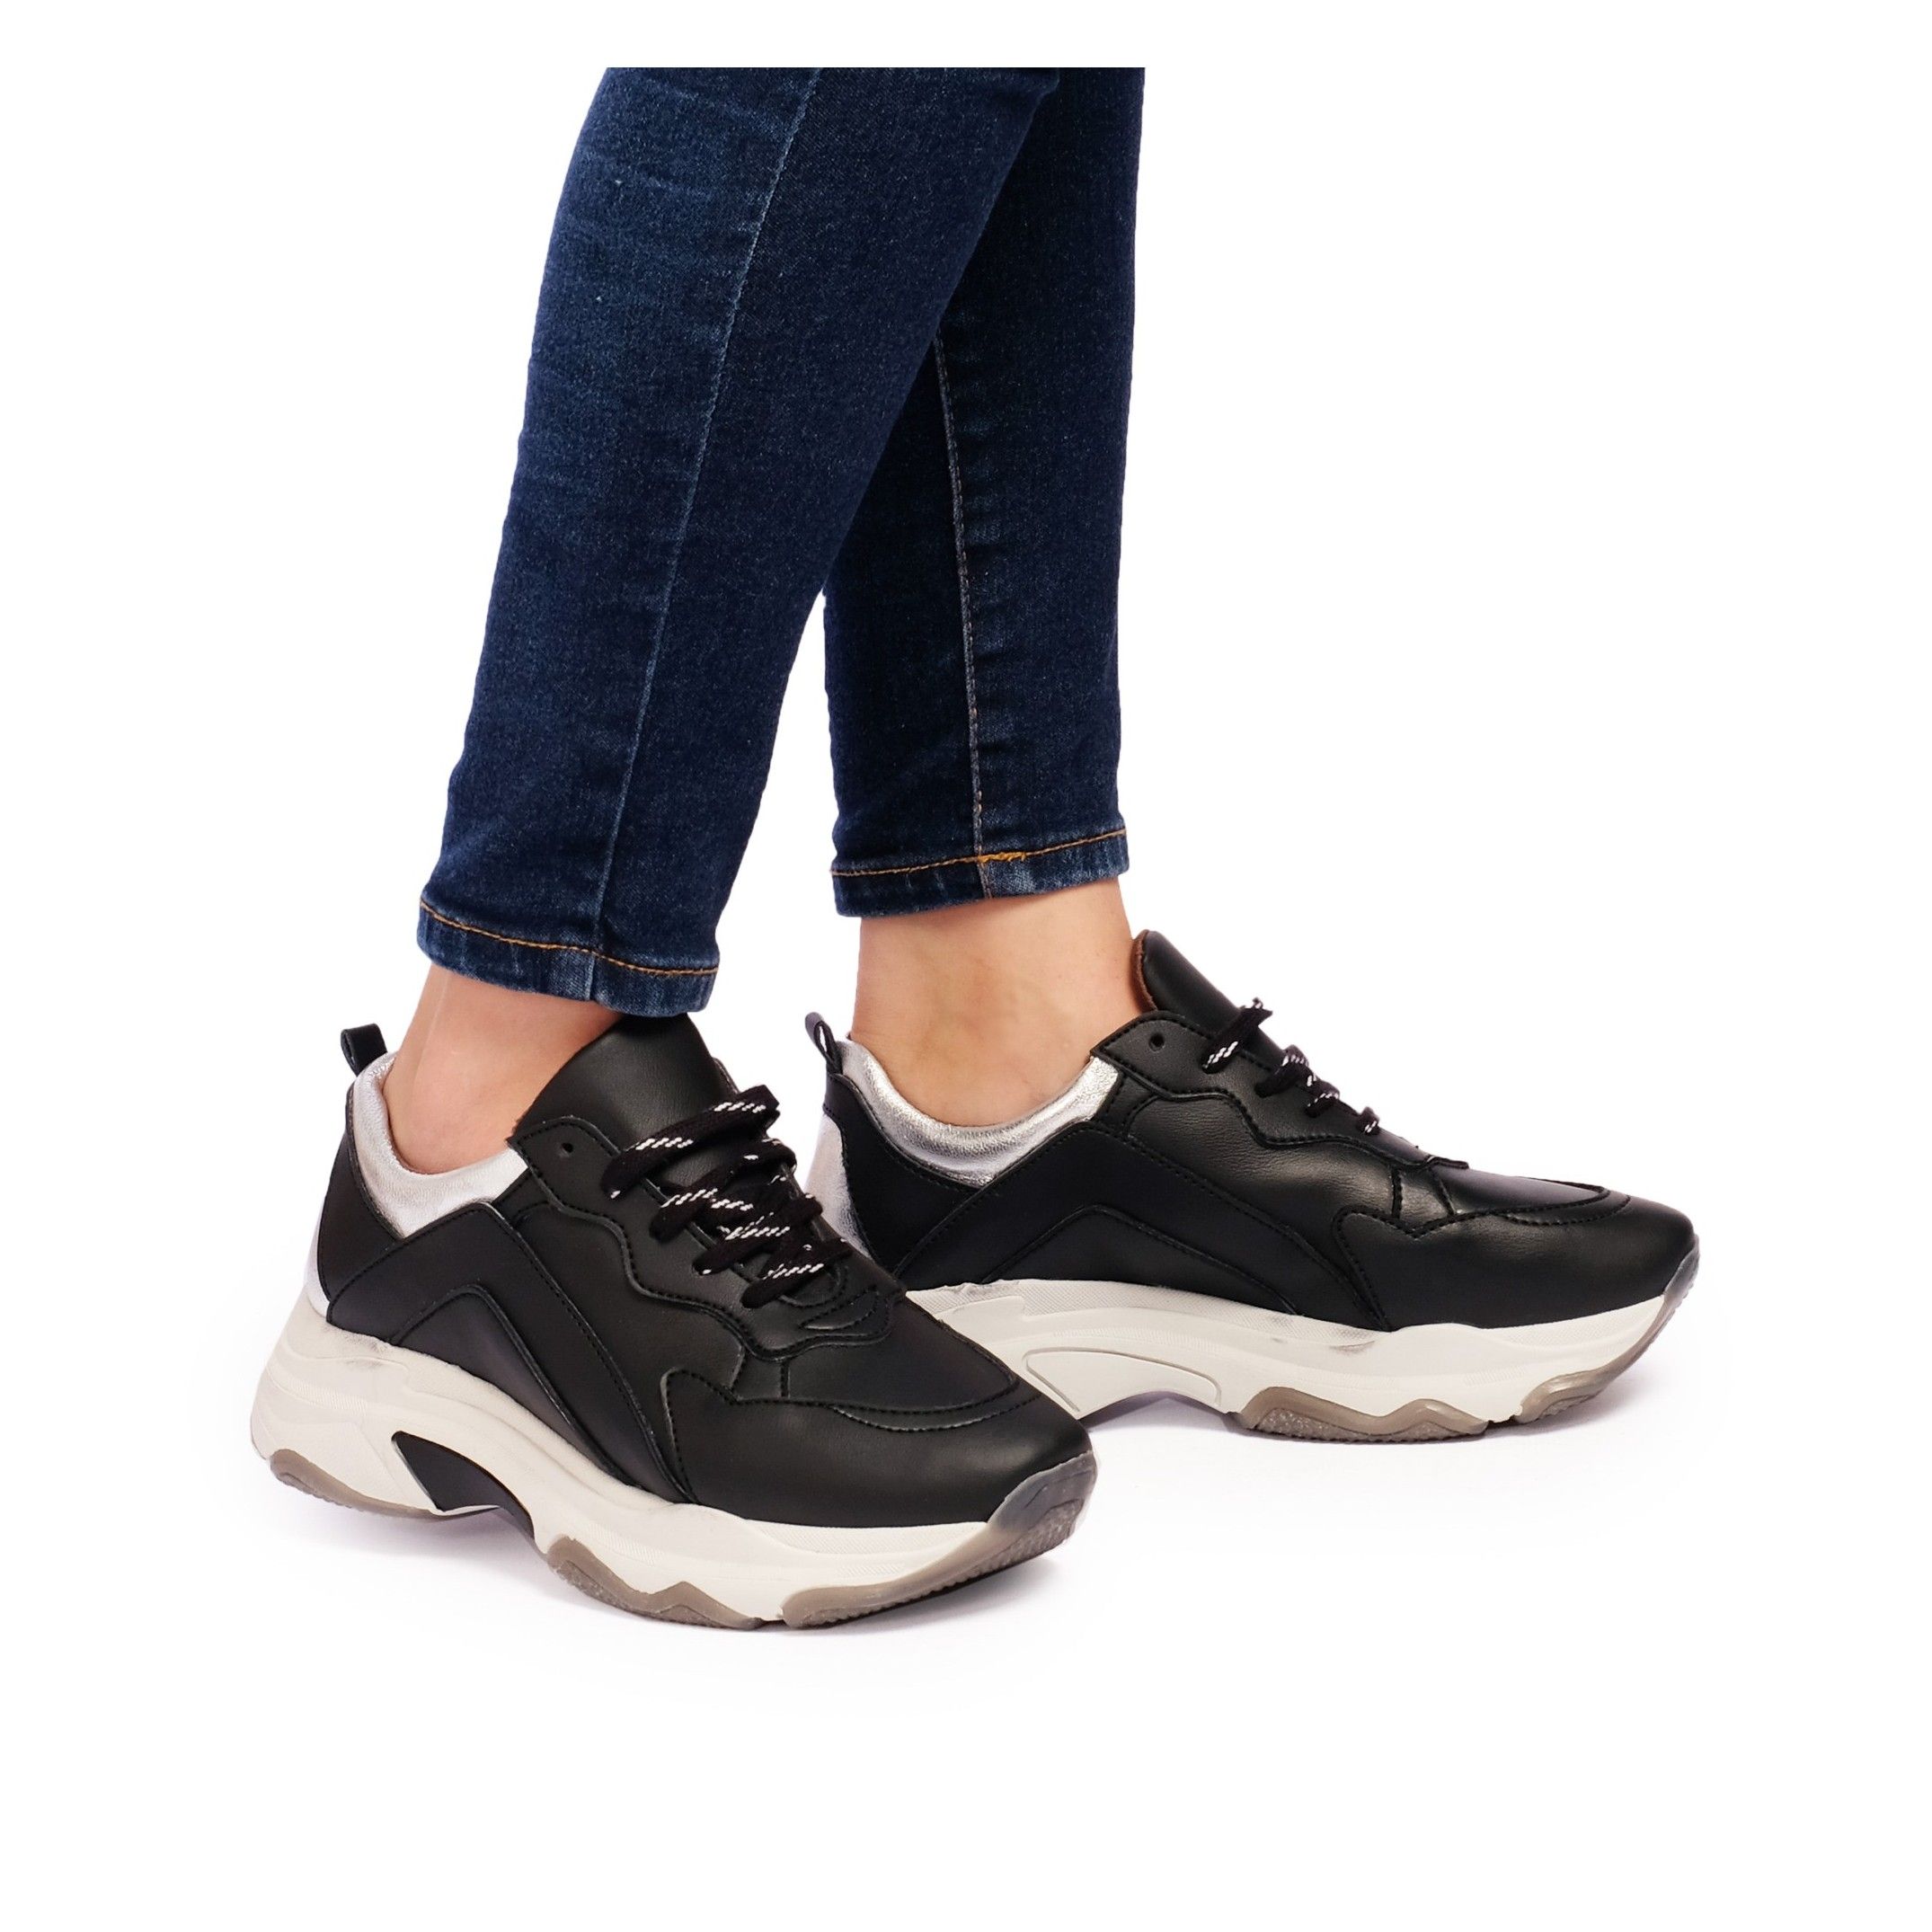 Leather high sneakers with laces for women. Upper, inner and insole made of leather. Laces closure.Platform: 2 cm. Wedge: 5 cm. Made in Spain.